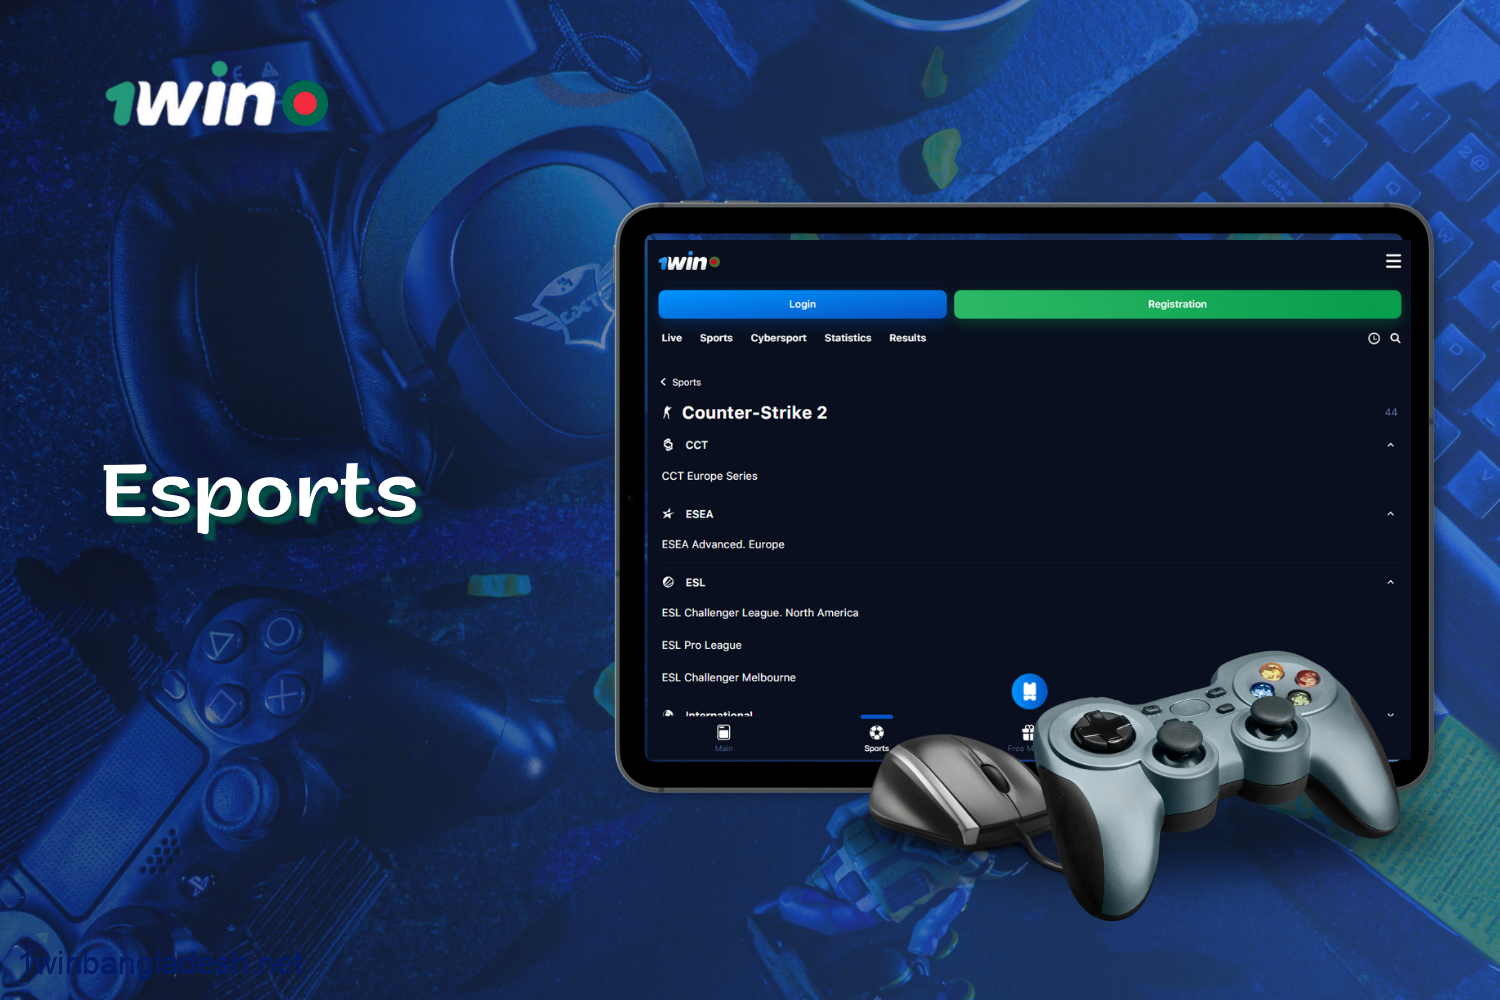 1win offers a wide range of eSports bets in the Sports section for players from Bangladesh